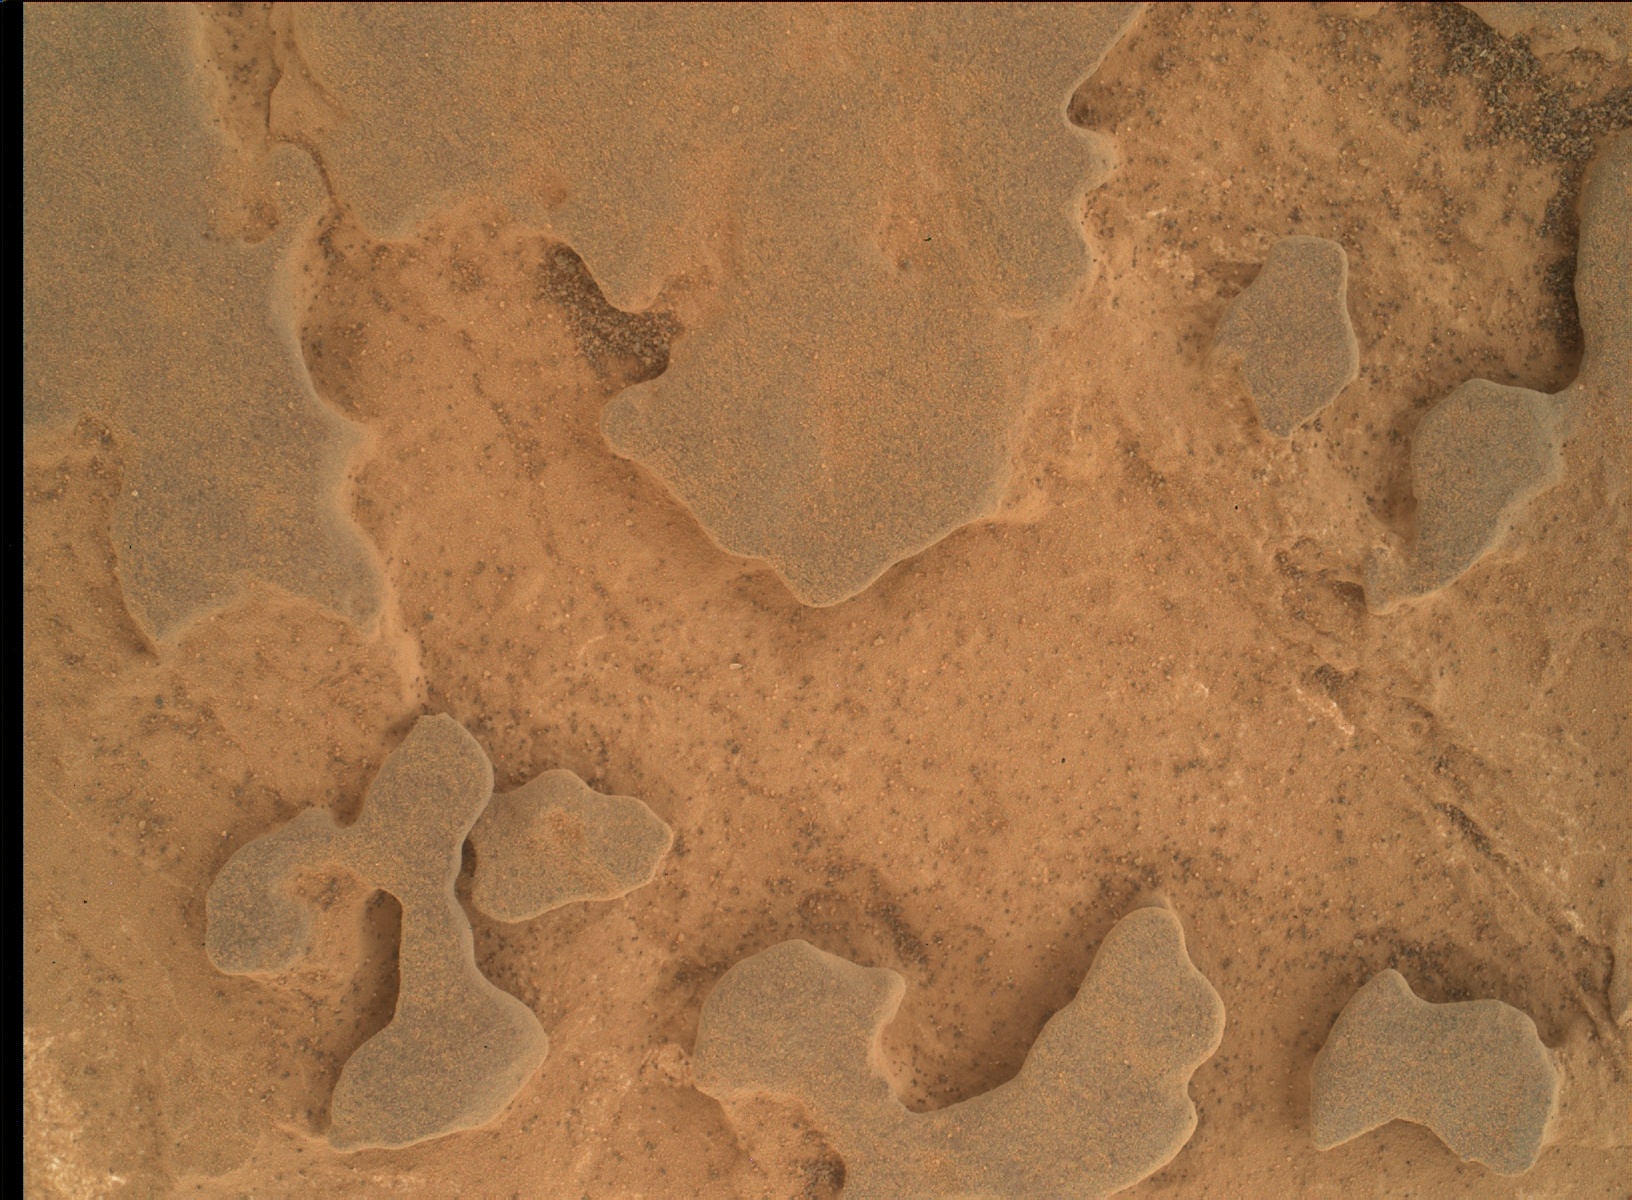 Nasa's Mars rover Curiosity acquired this image using its Mars Hand Lens Imager (MAHLI) on Sol 1727